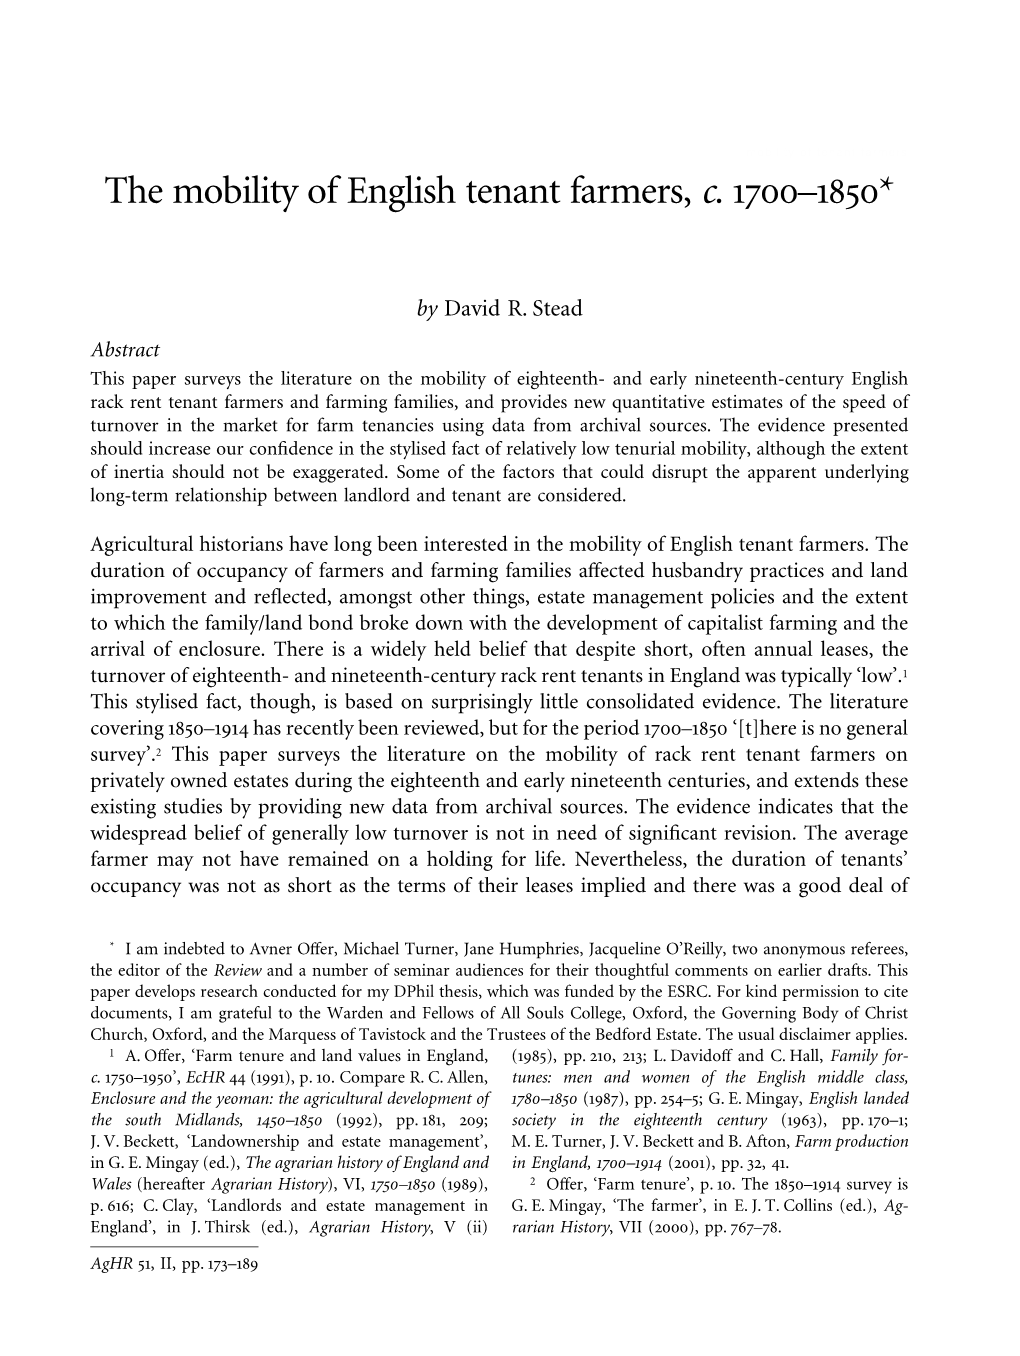 The Mobility of English Tenant Farmers, C. 1700–1850*